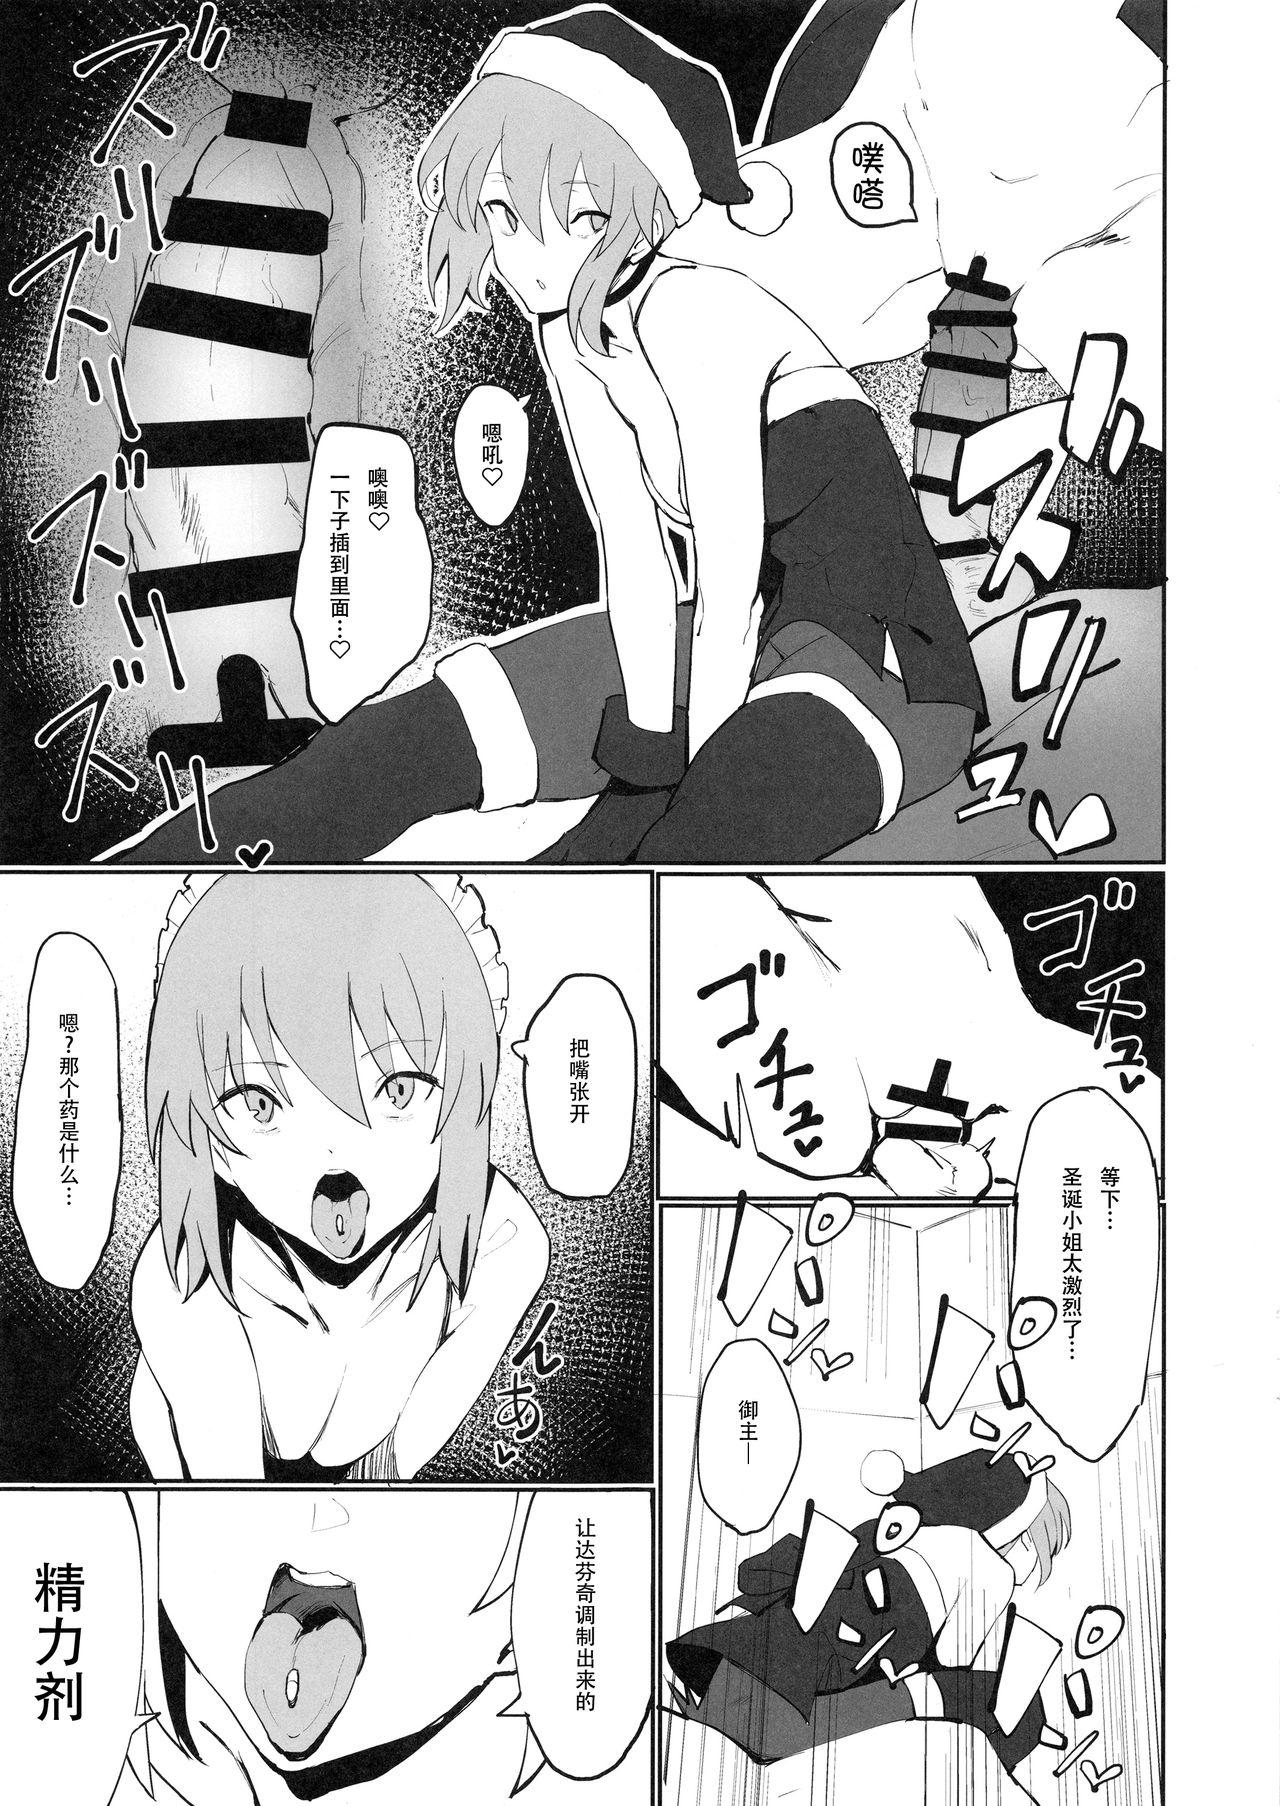 Good Saber Alter to Maryoku Kyoukyuu | 和saber alter的魔力供给♡ - Fate grand order Fucking Sex - Page 10